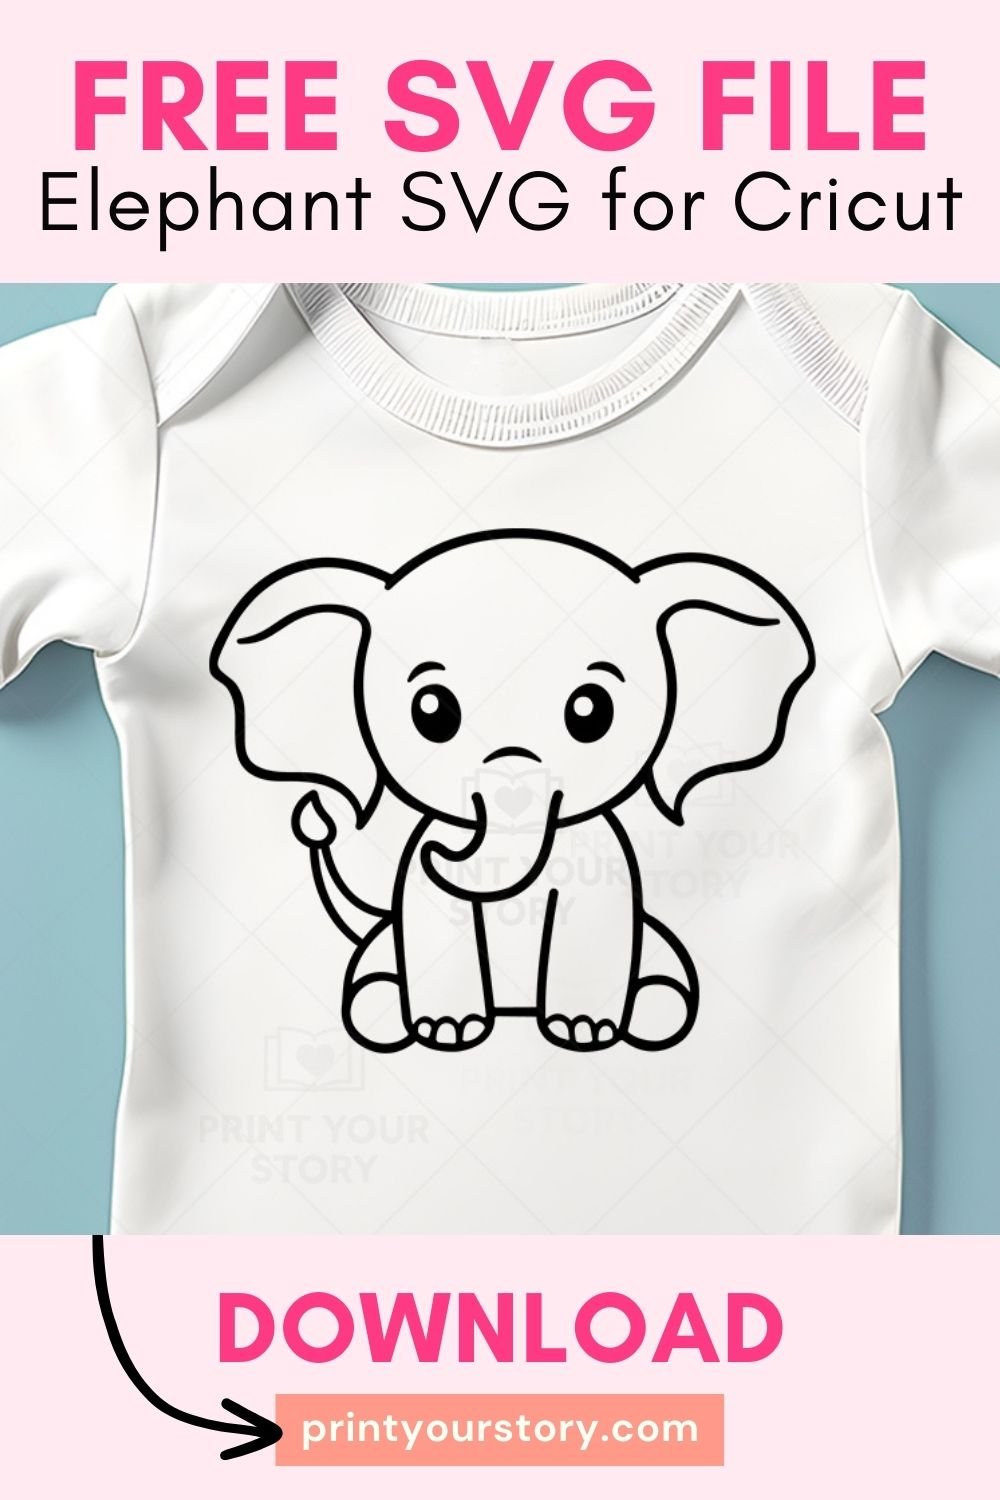 Free Baby Elephant SVG file for Cricut - Personal Use